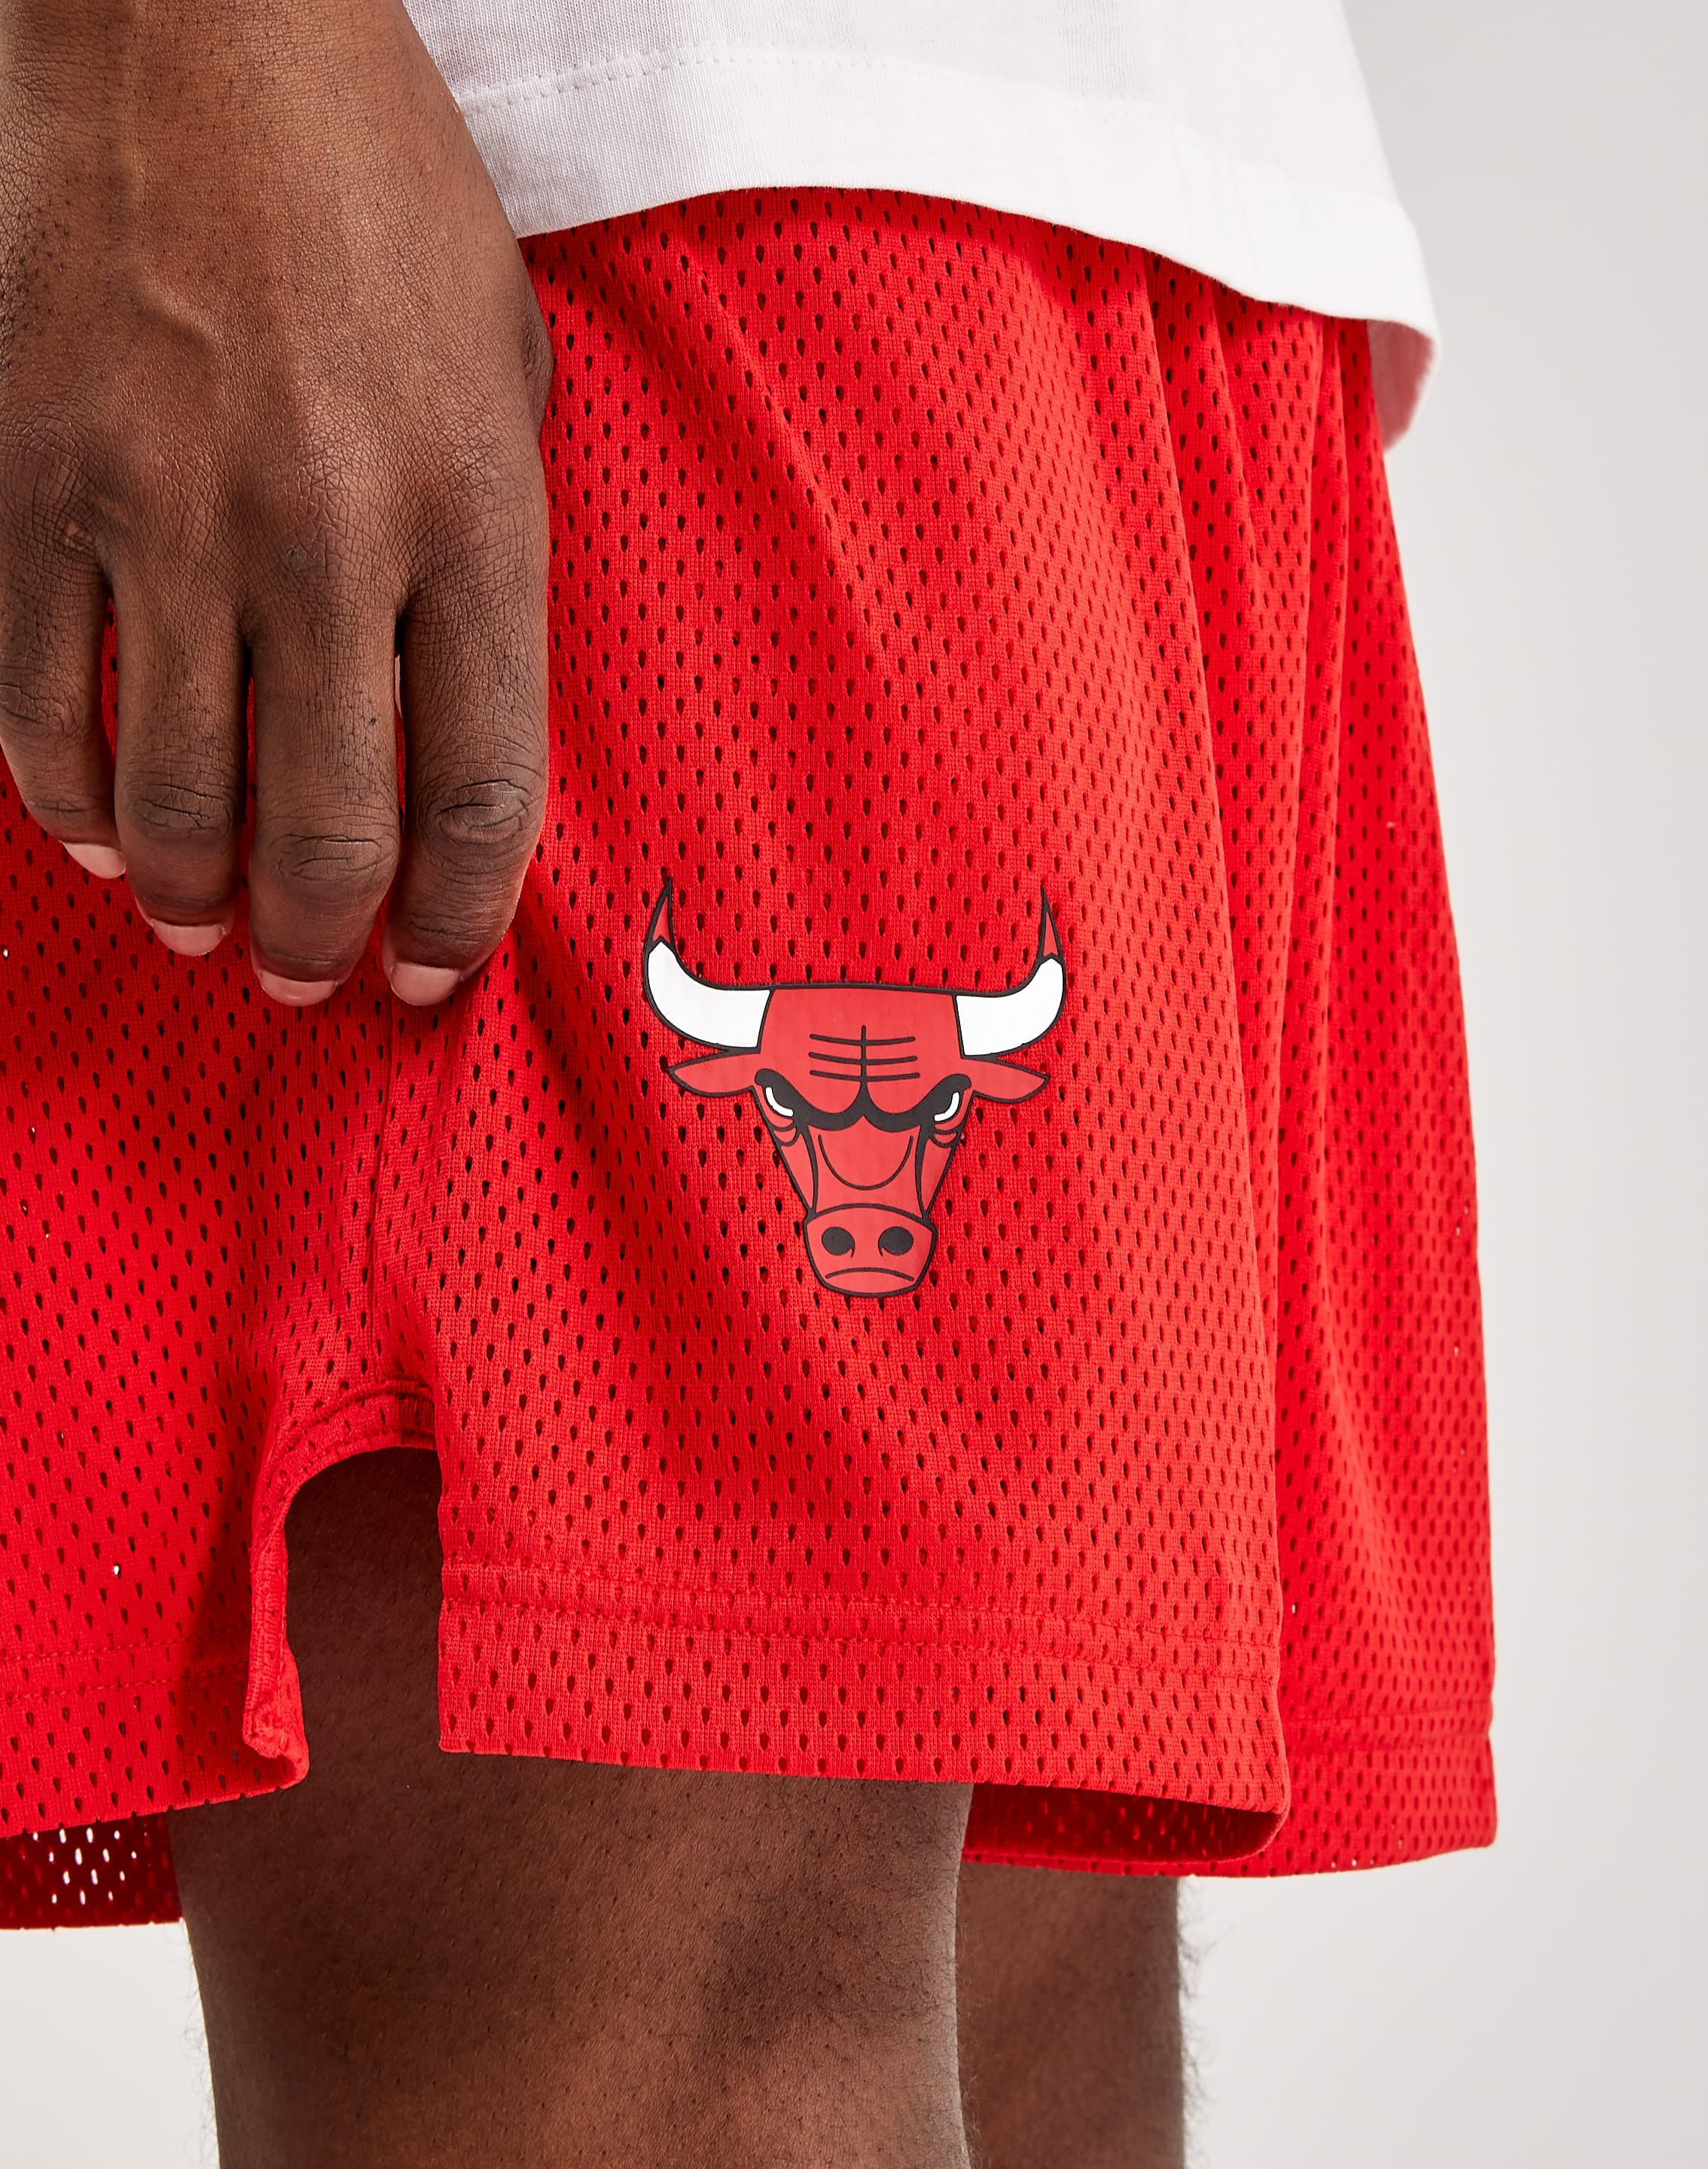 Chicago Bulls Nike Men's NBA Shorts in Red, Size: XL | DN8228-657